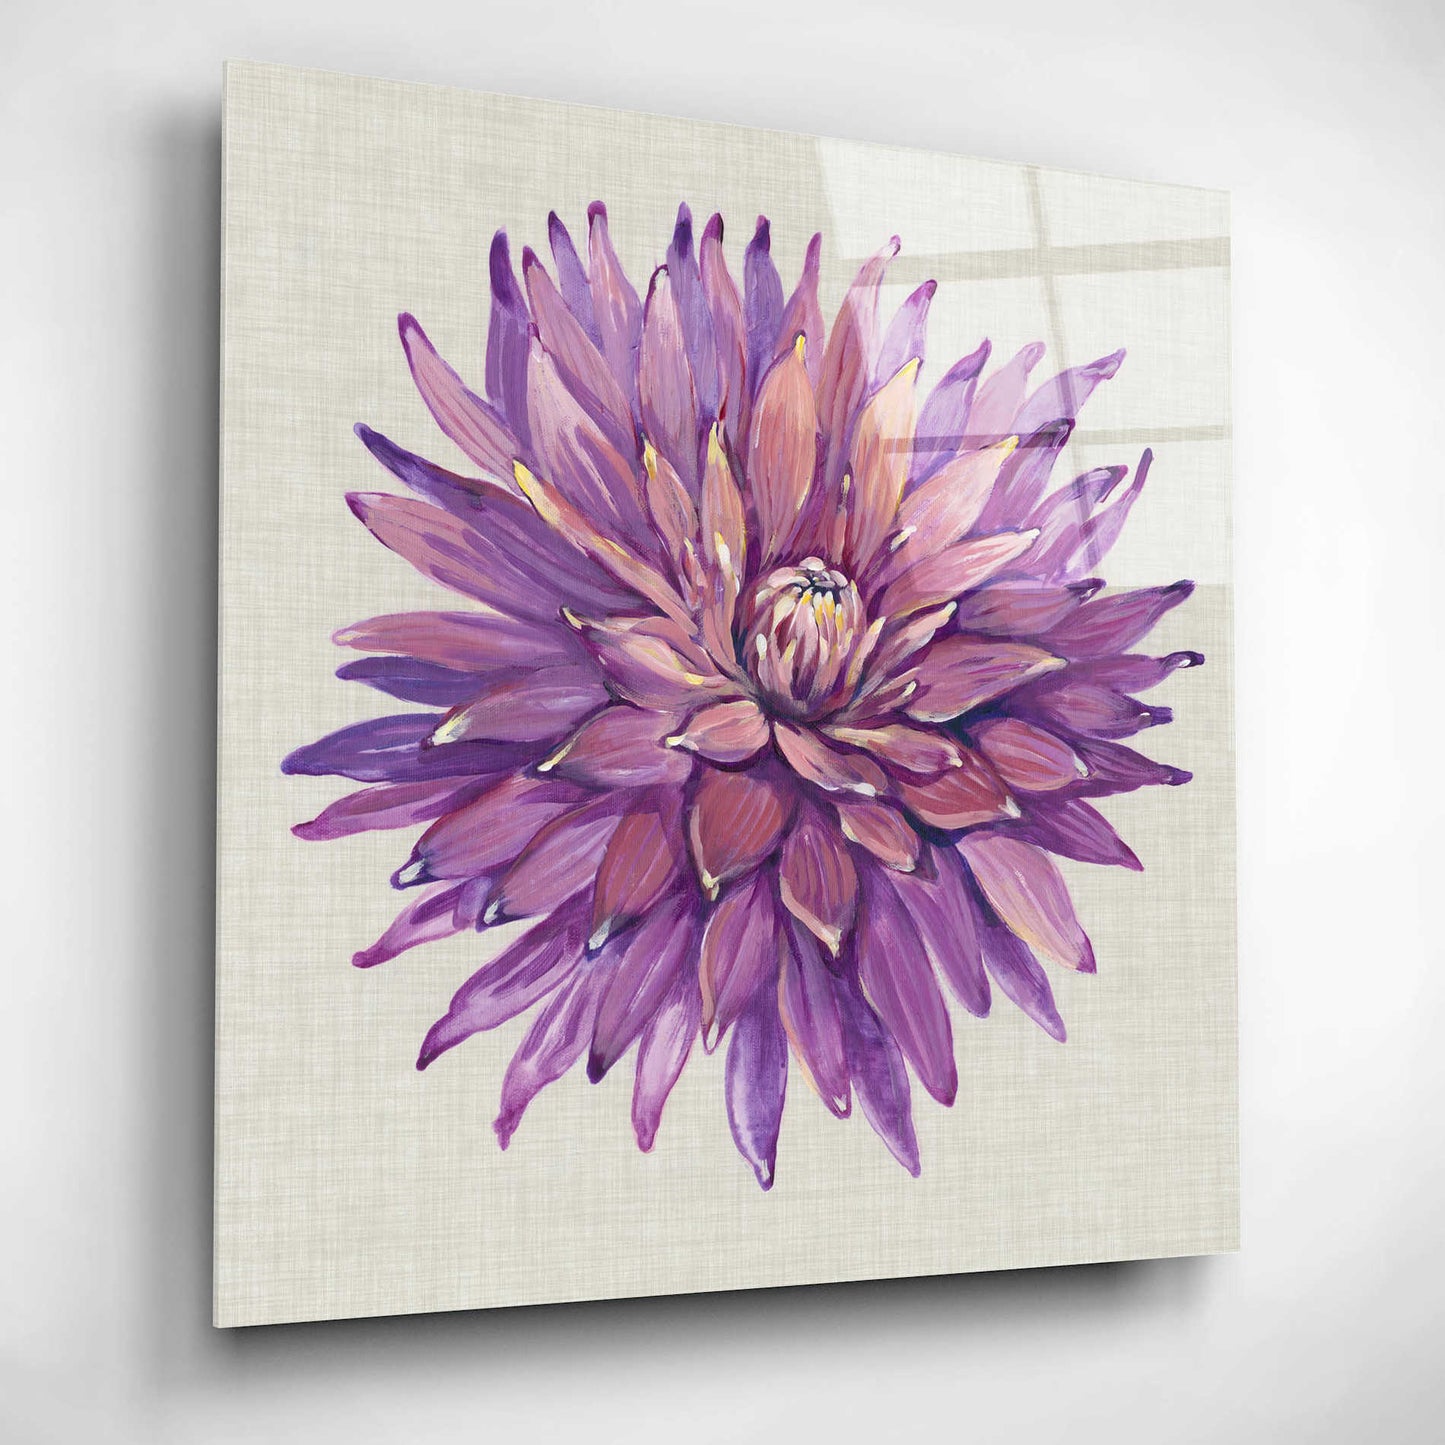 Epic Art 'Floral Portrait on Linen II' by Tim O'Toole, Acrylic Glass Wall Art,12x12